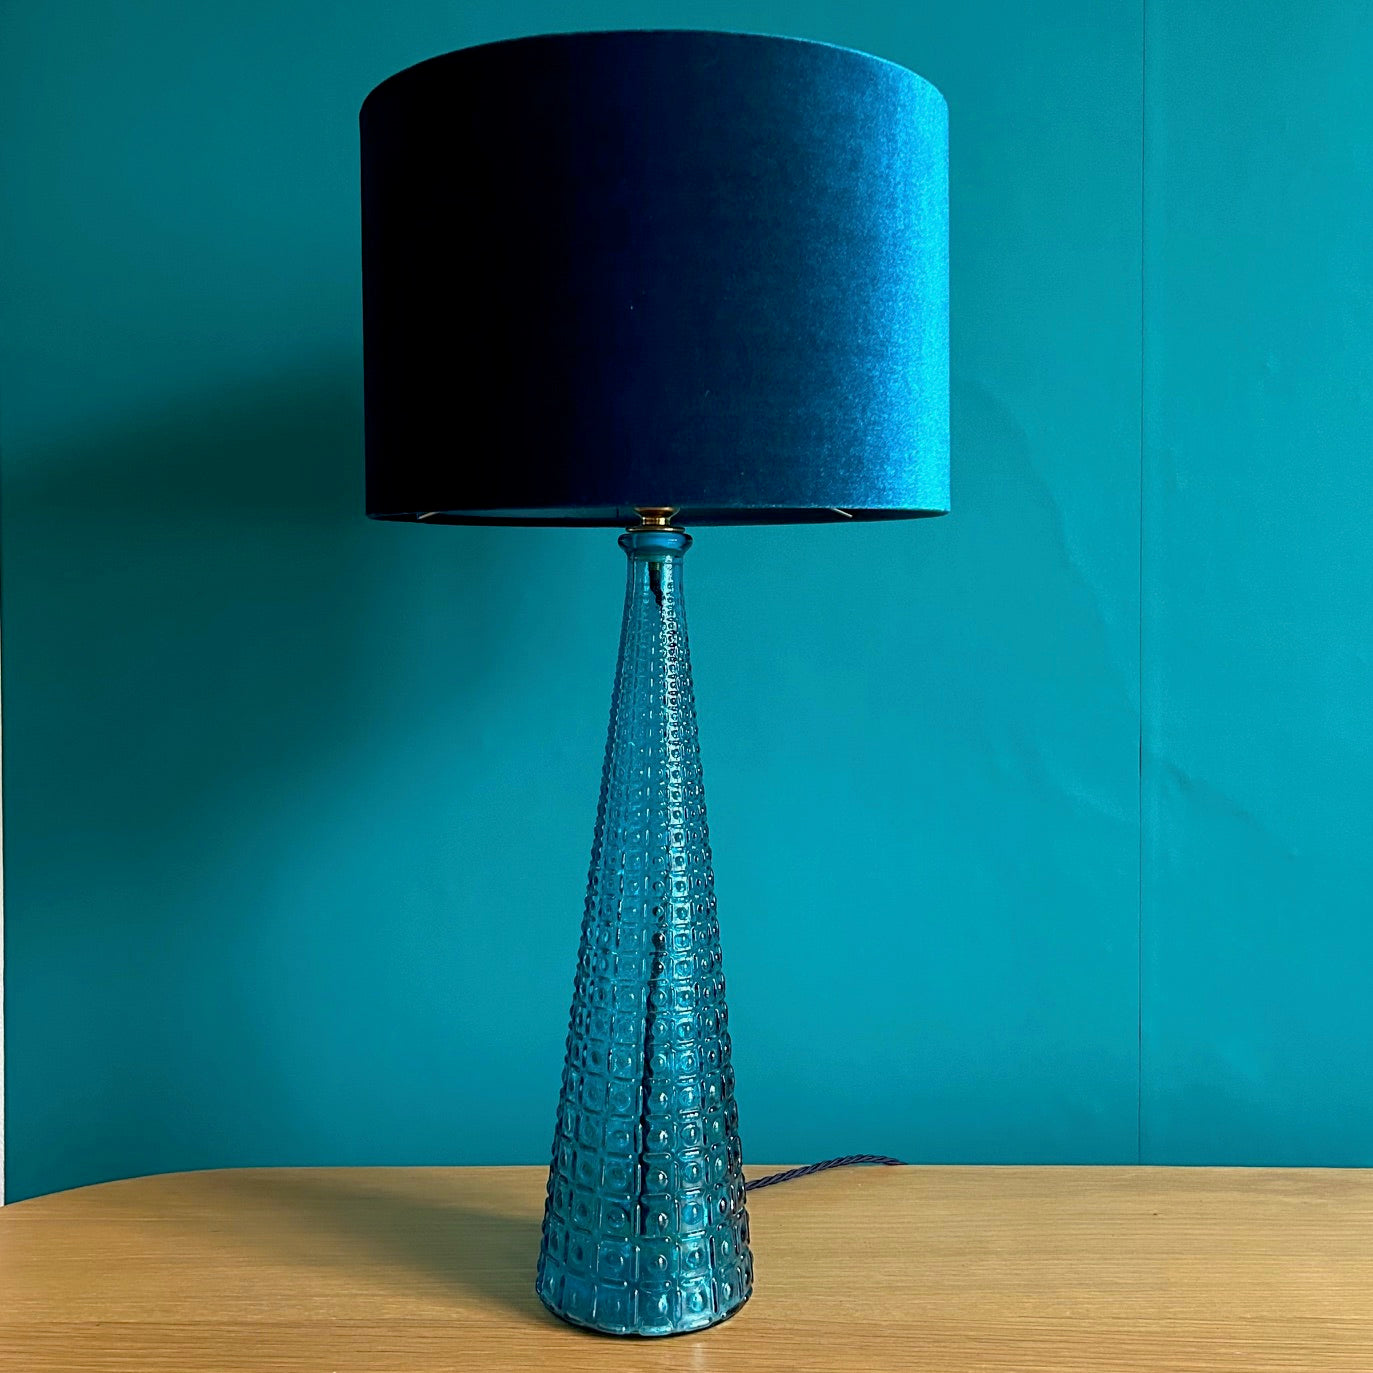 Glass cone lamp in turquoise